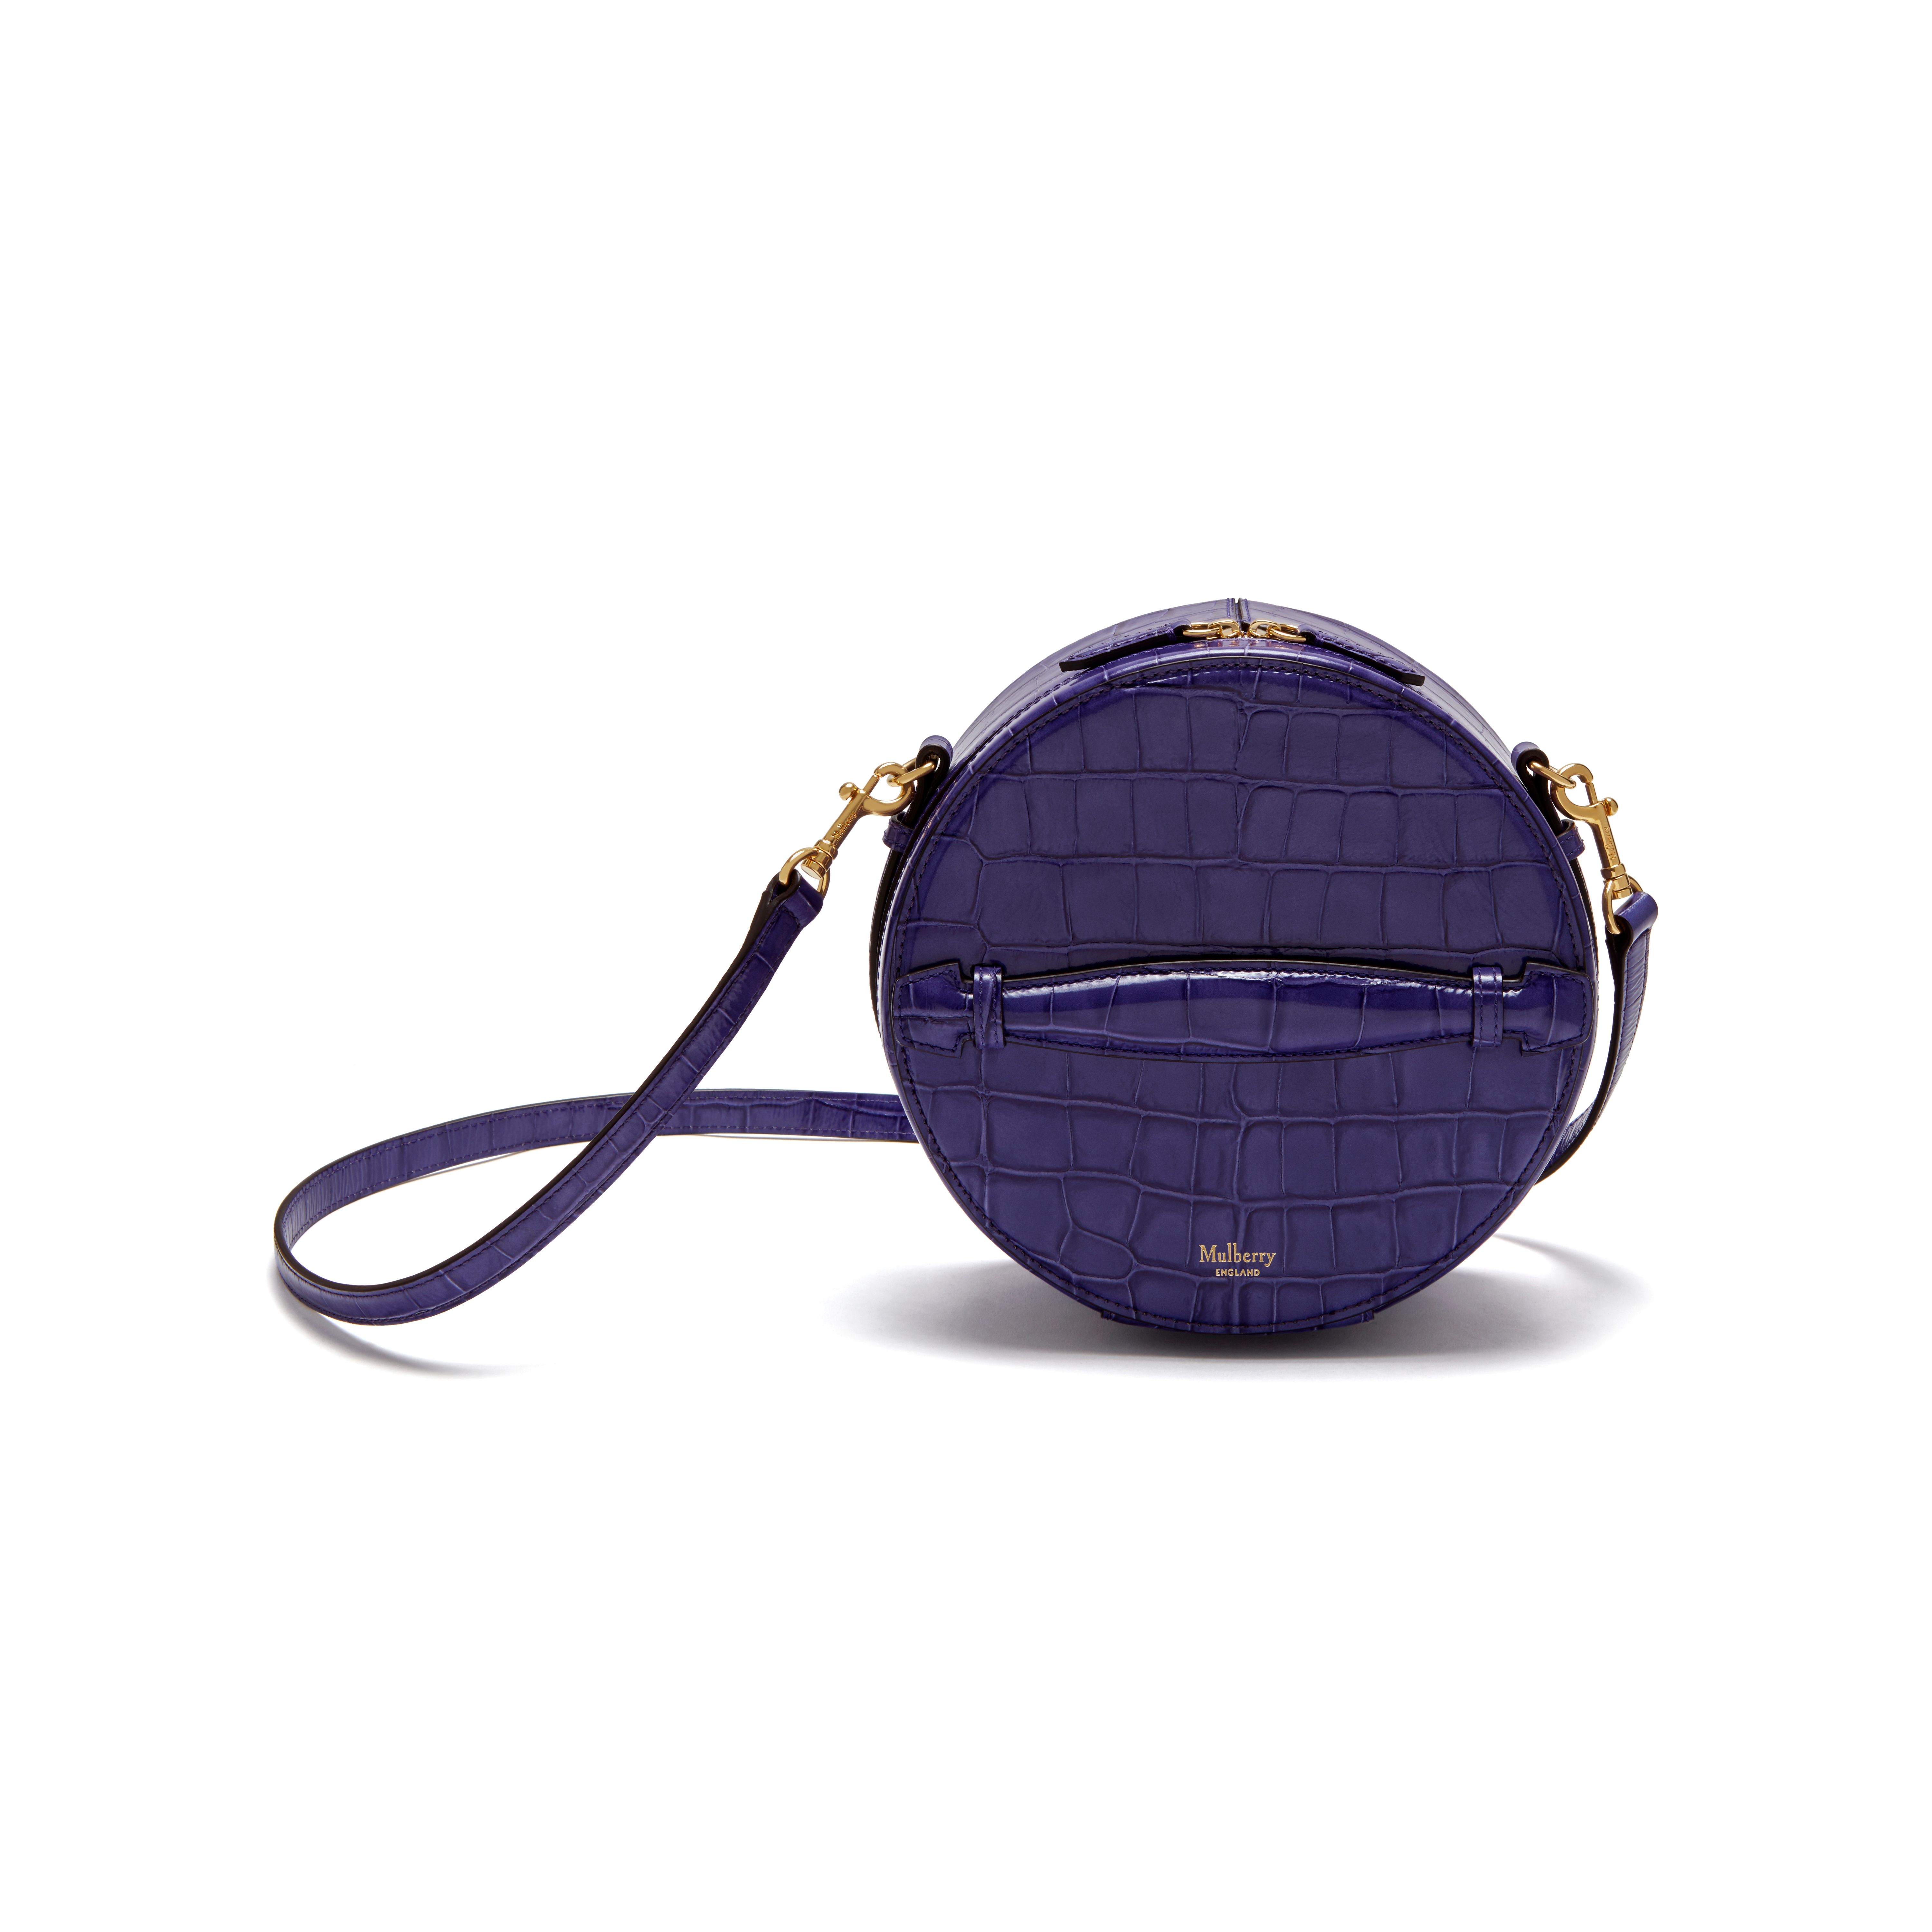 Mulberry | Buy or Sell your Luxury items online! - Vestiaire Collective